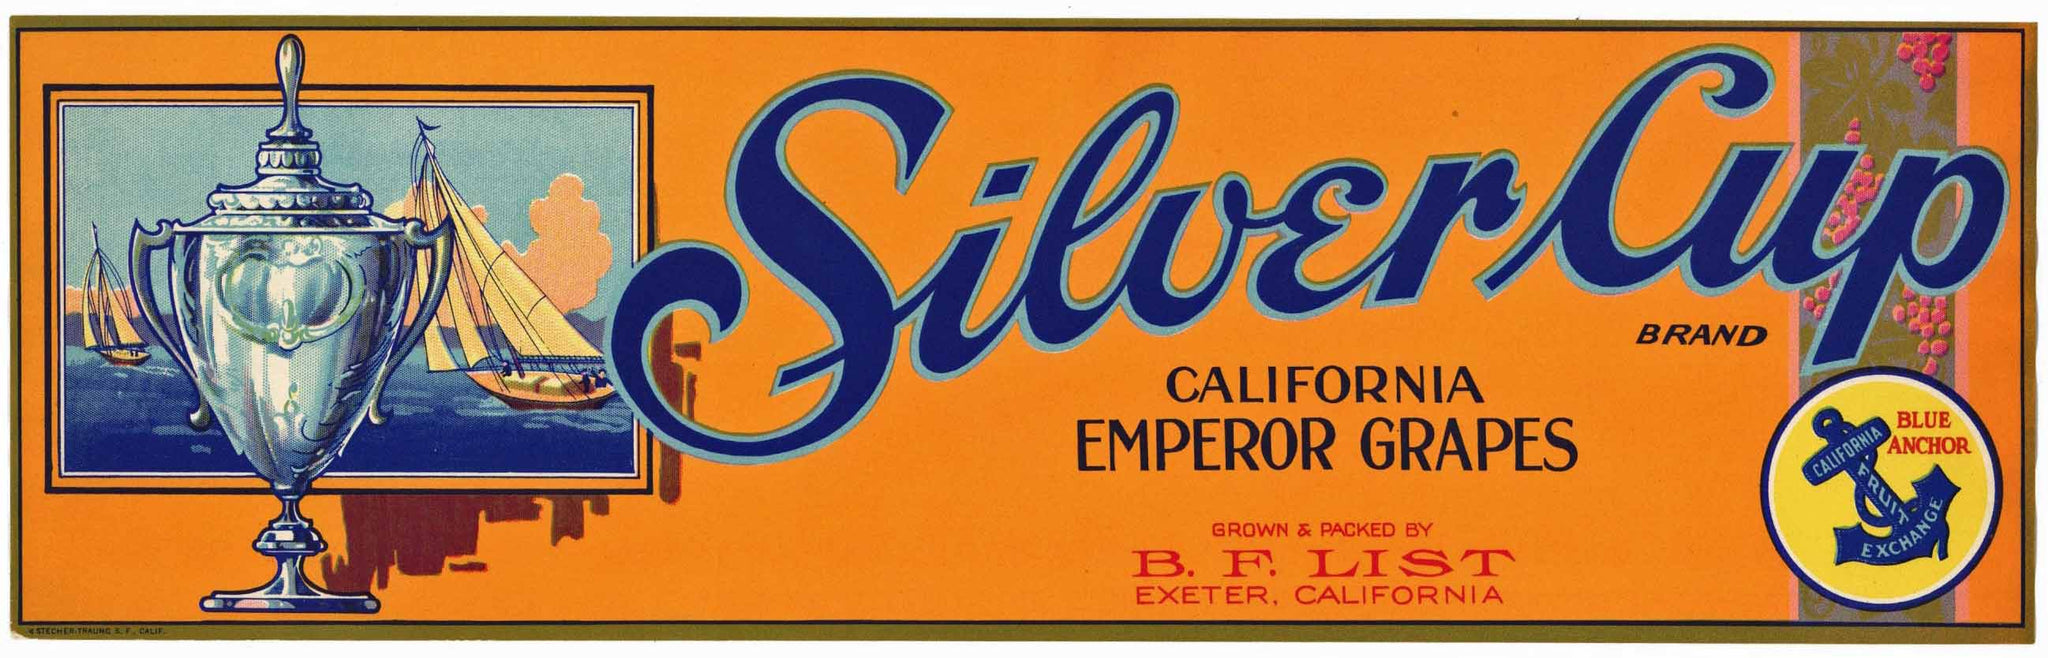 Siver Cup Brand Vintage Exeter California Grape Crate Label, early